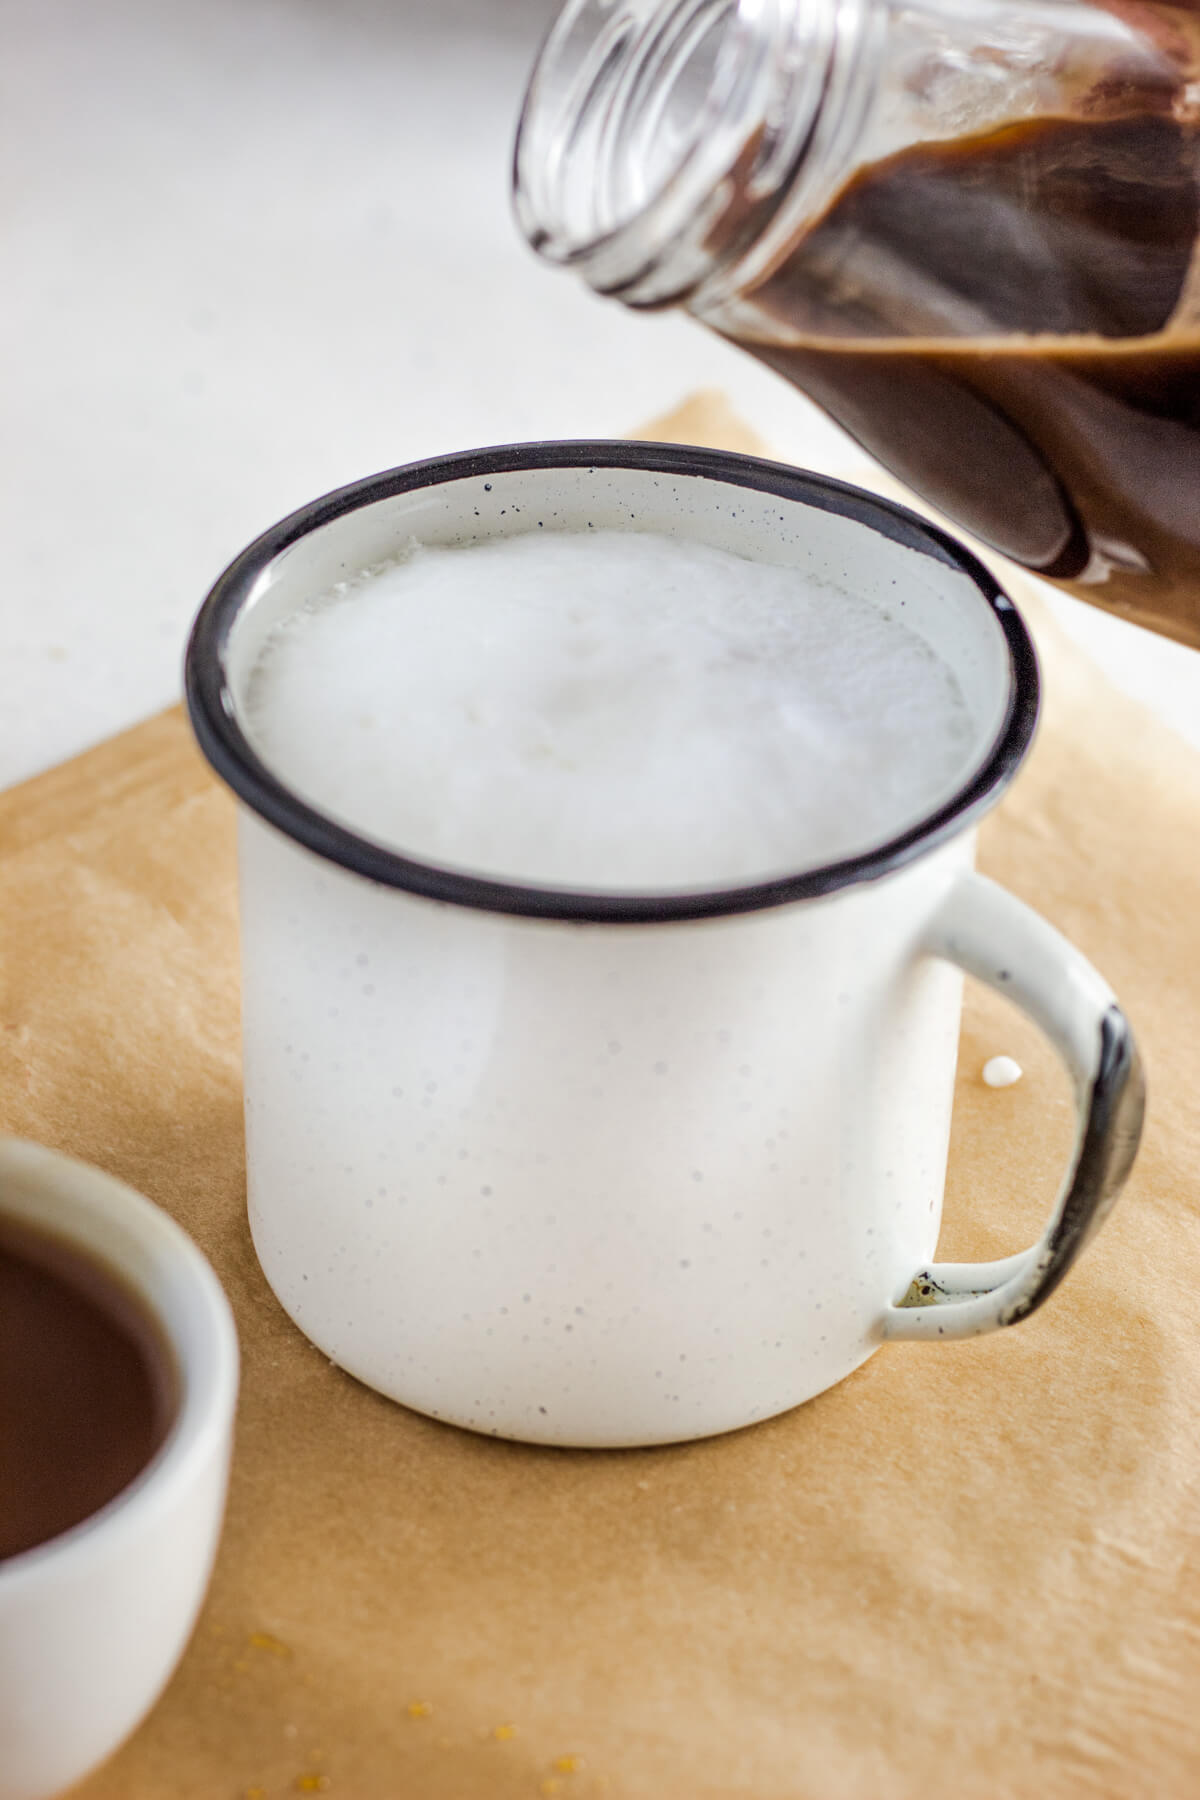 Hot espresso being poured into a white mug filled with frothy hot milk.